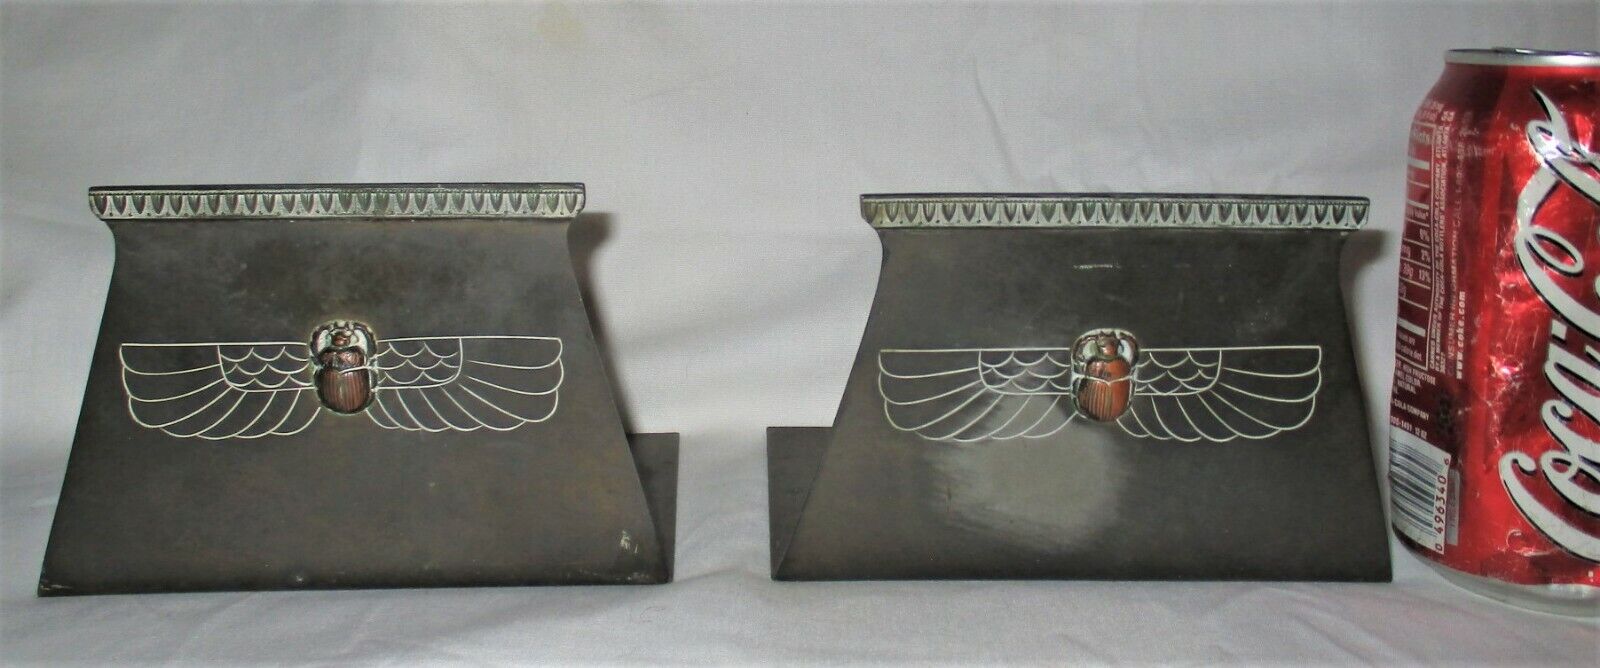 ANTIQUE KARNAK 541 BRASS MISSION ARTS CRAFTS WING SCARAB BOOK EGYPTIAN BOOKENDS